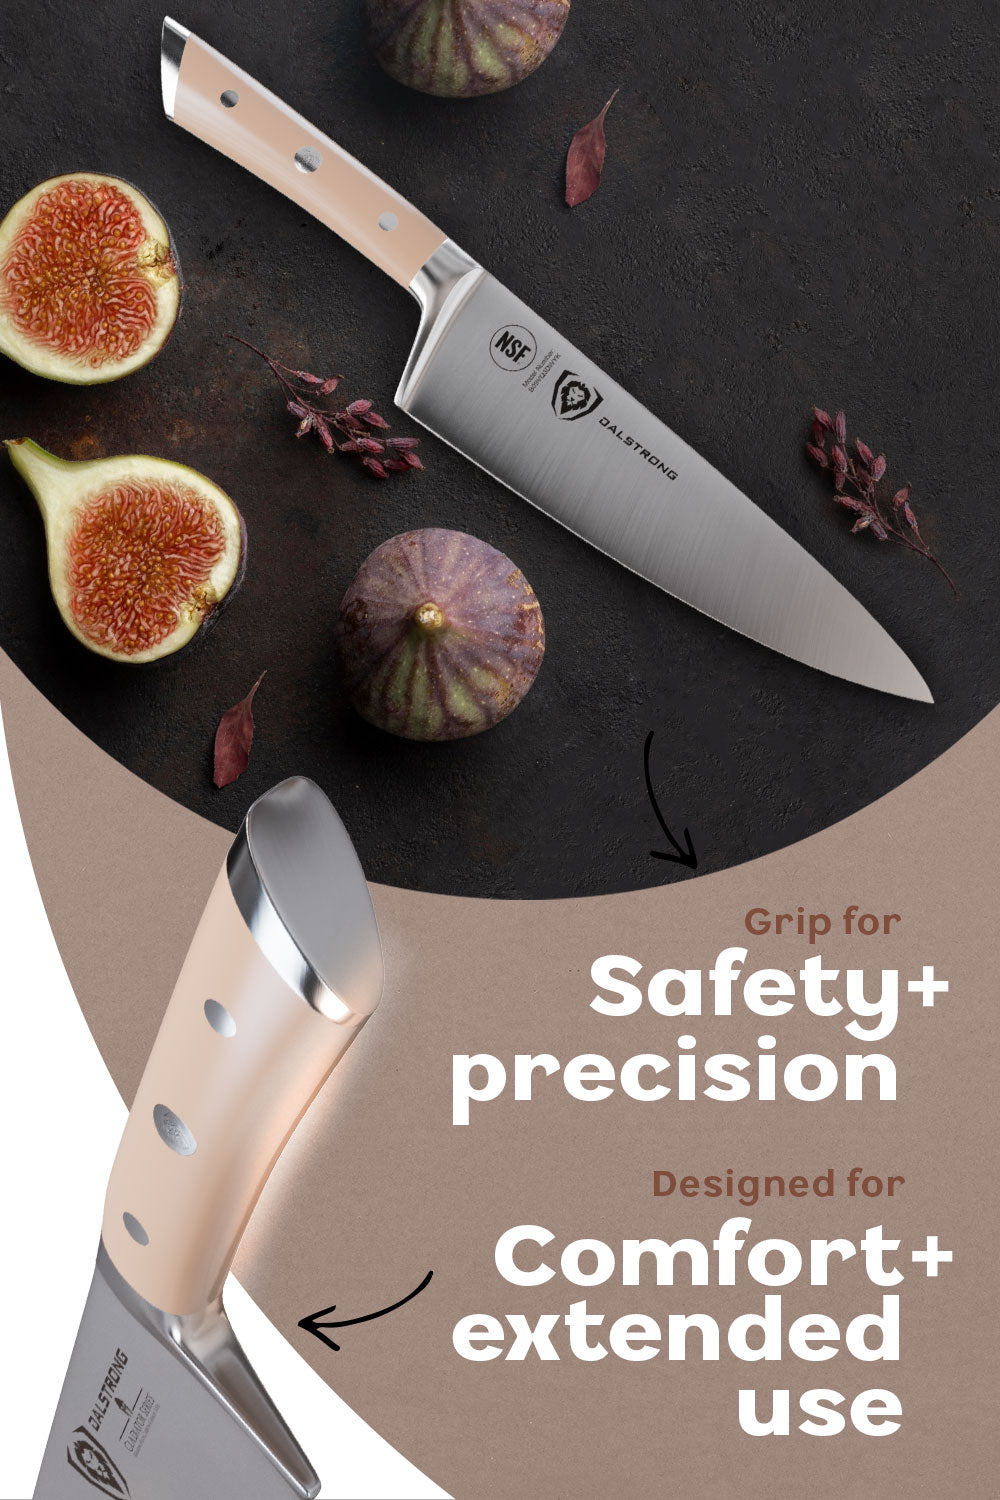 Dalstrong gladiator series 8 inch chef knife showcasing it's grip and comfortable peach handle.